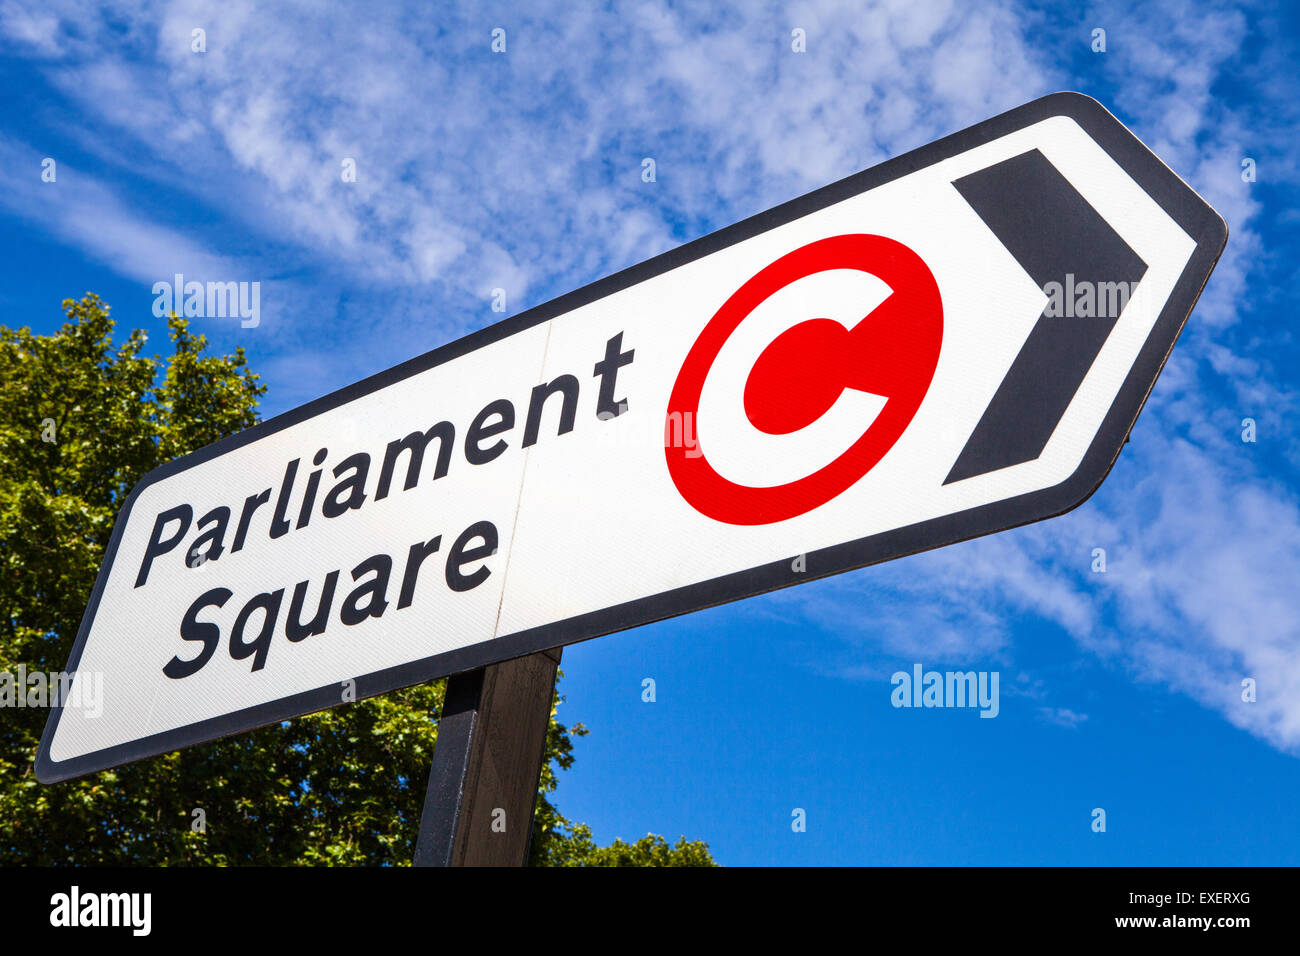 LONDON, UK - JULY 10TH 2015: A road sign pointing to the direction of Parliament Square and also displaying the Congestion Charg Stock Photo